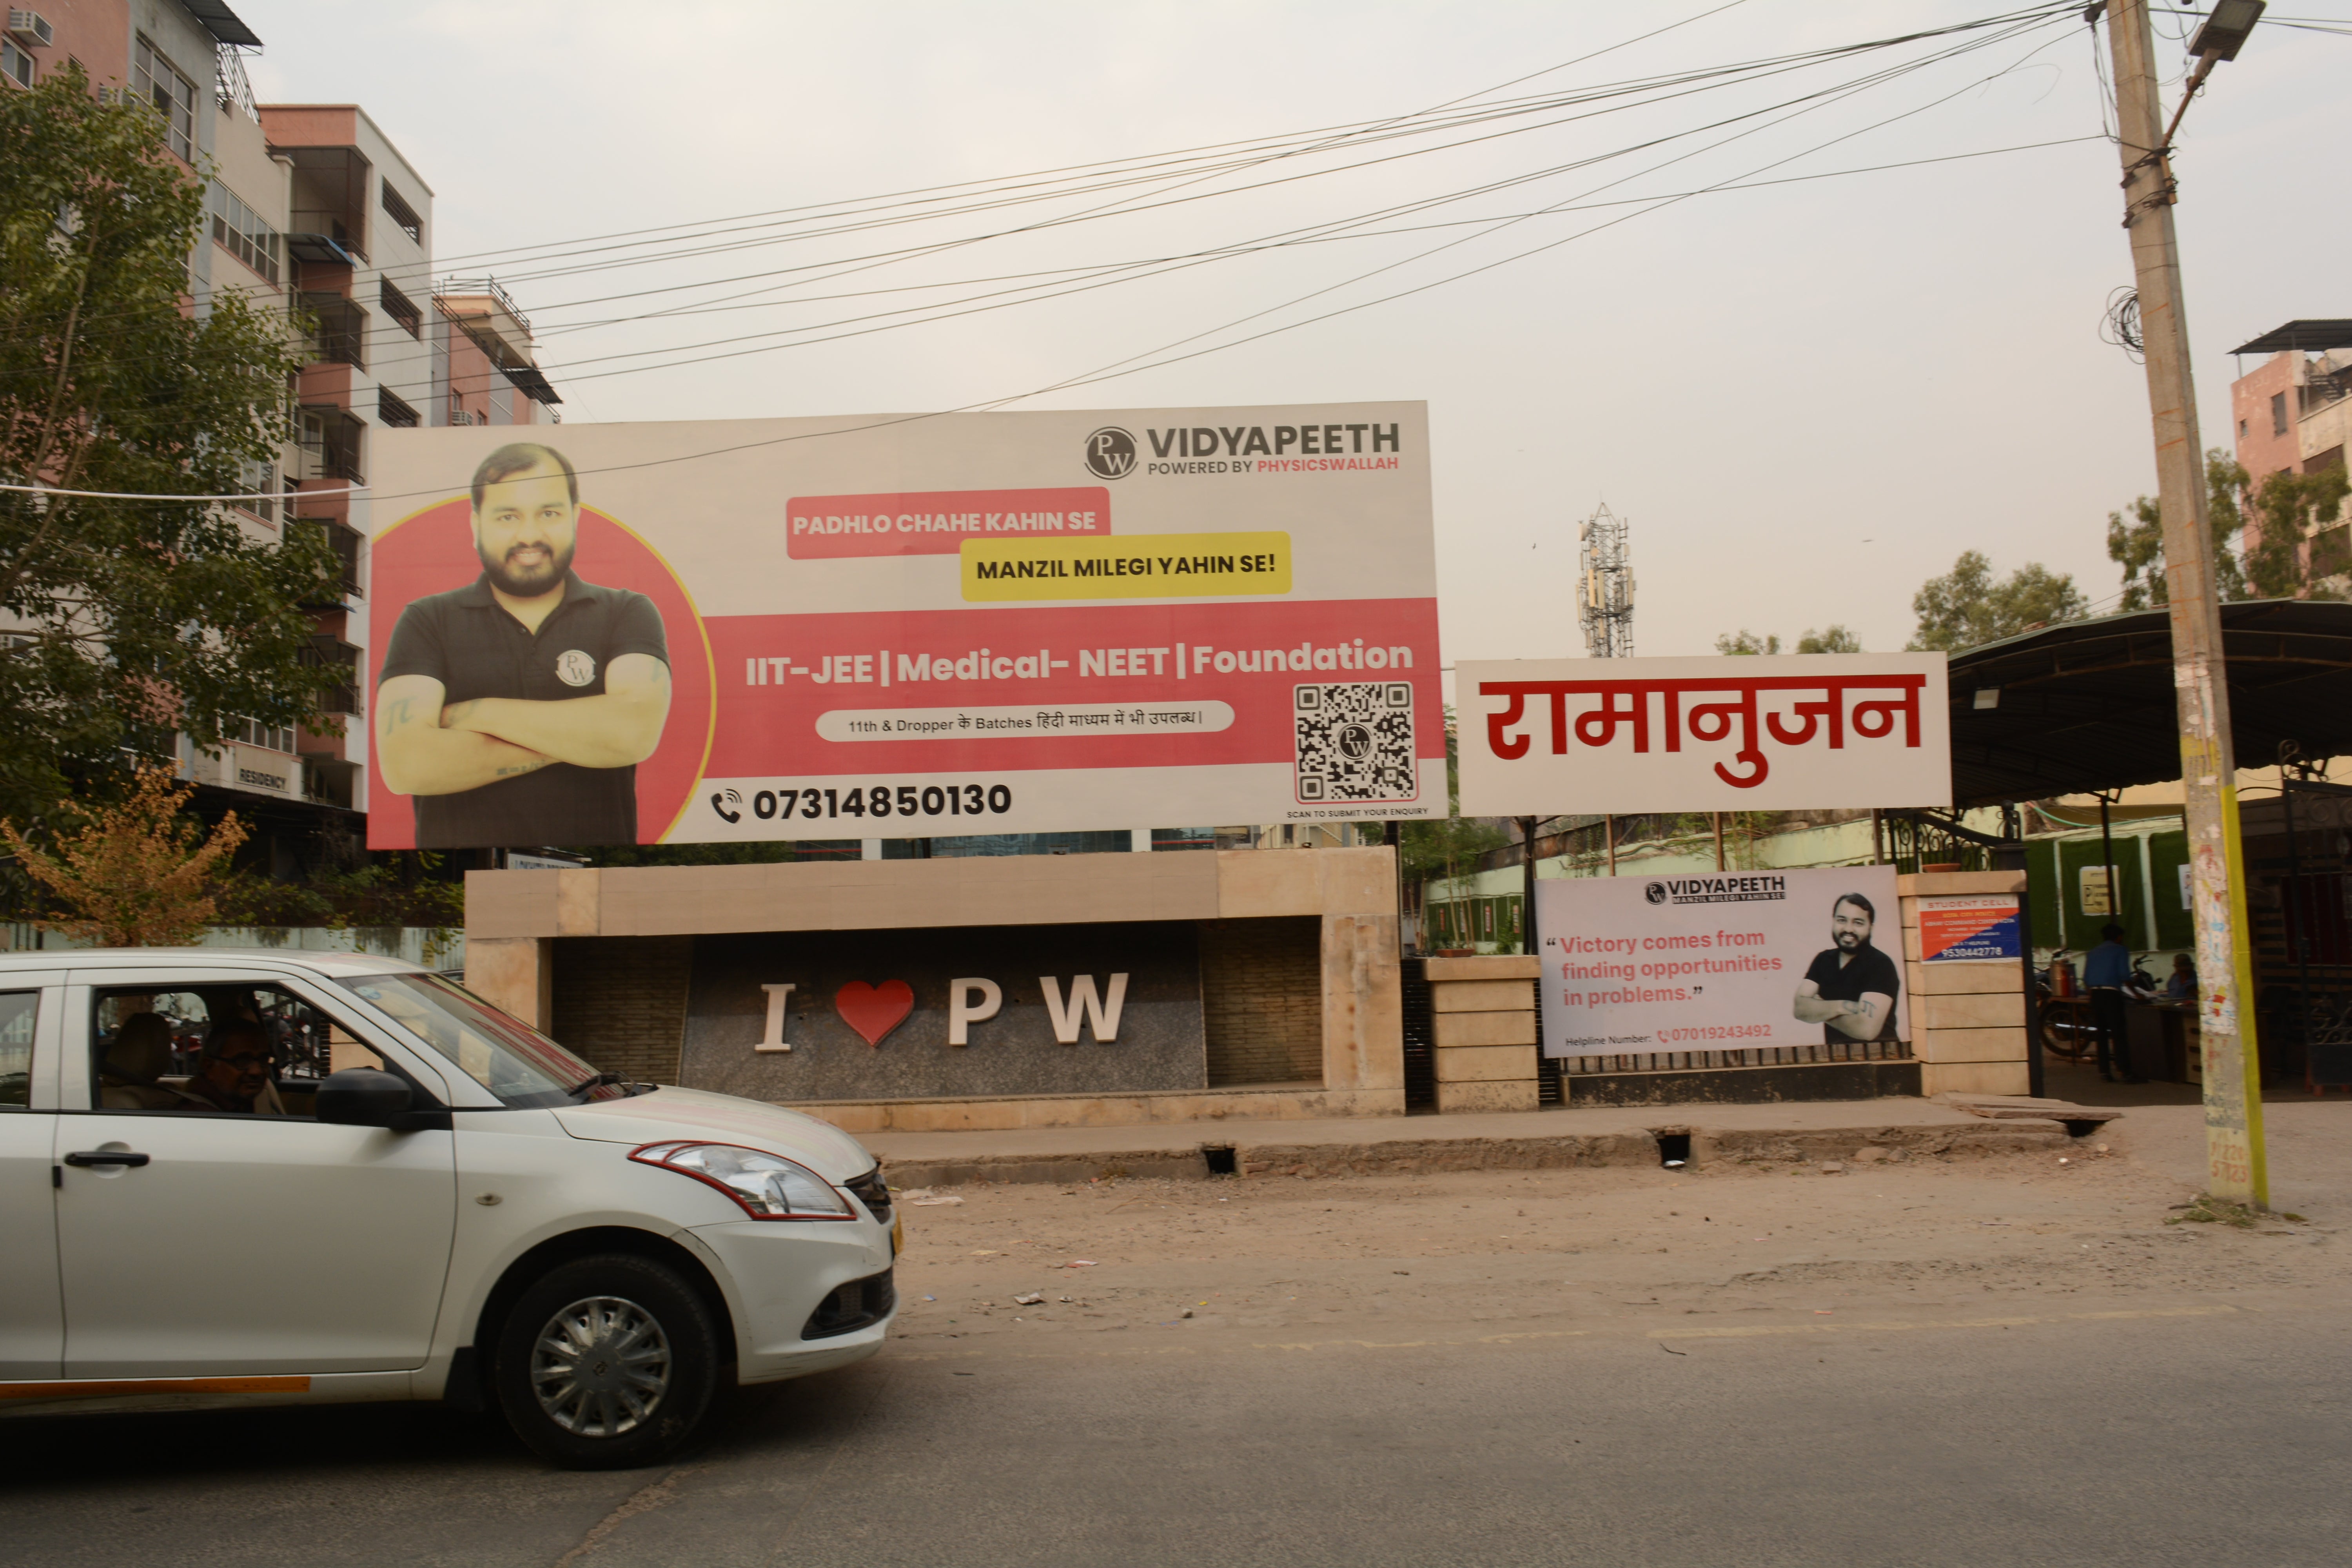 Billboard of a coaching institute publicising their ability to help students crack competitive exams